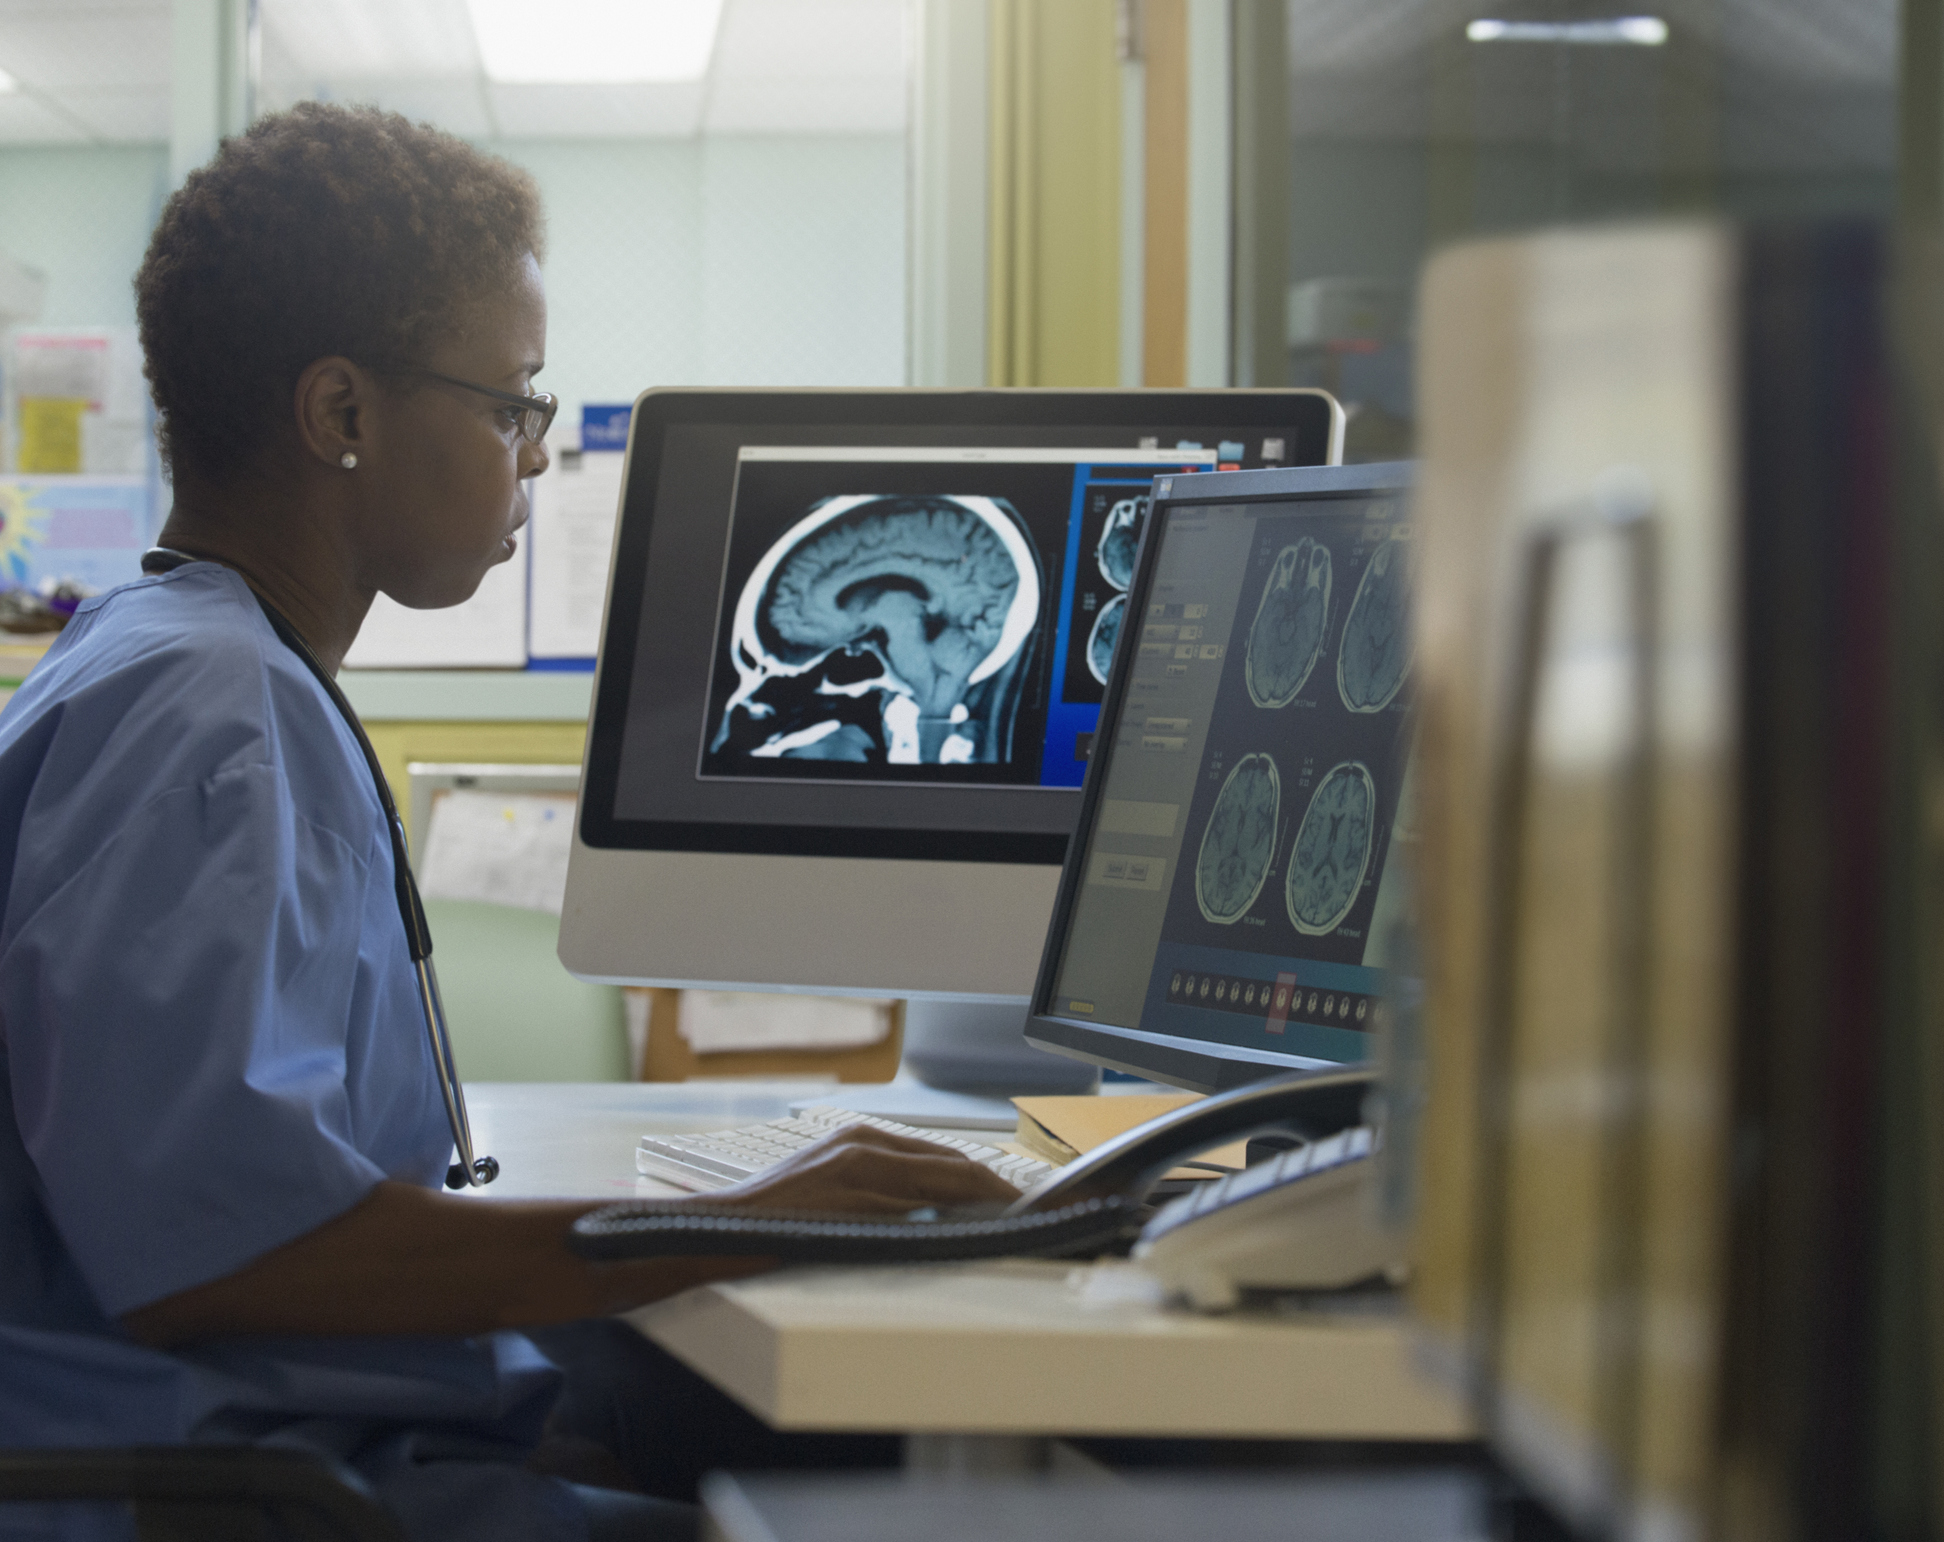 A radiology worker behind a computer